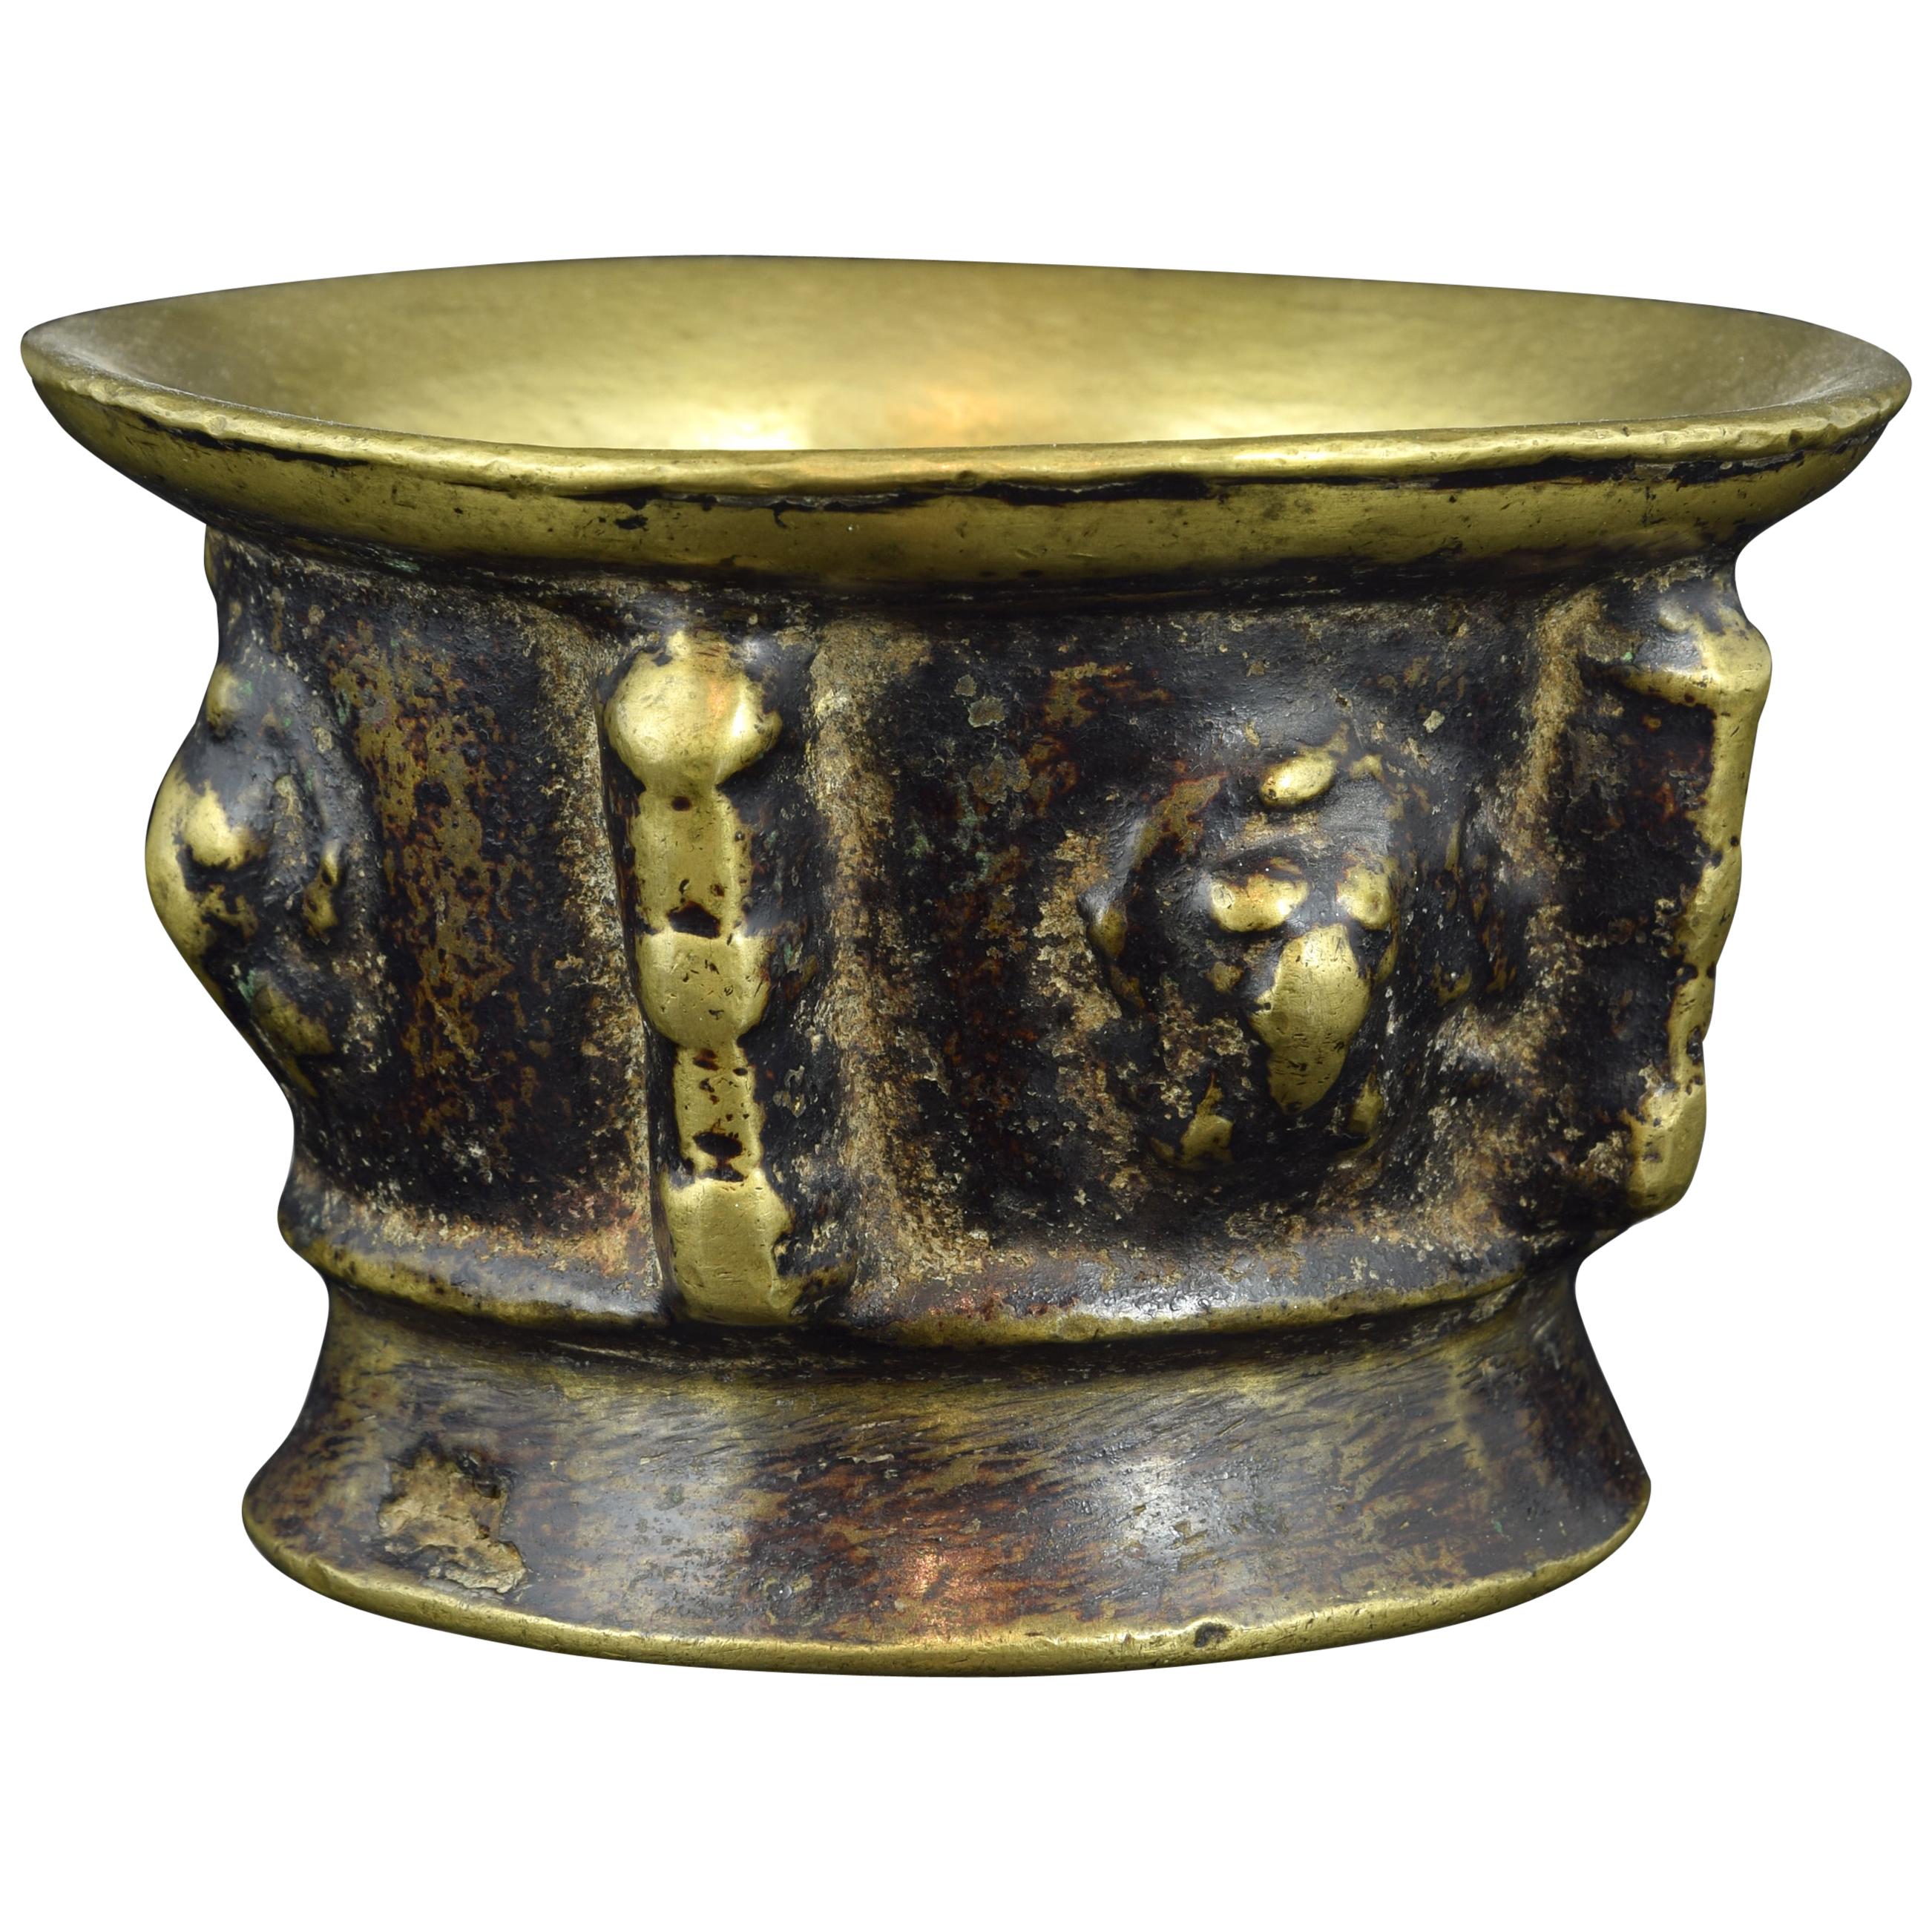 Bronze Mortar with Ribs Decoration, 17th Century